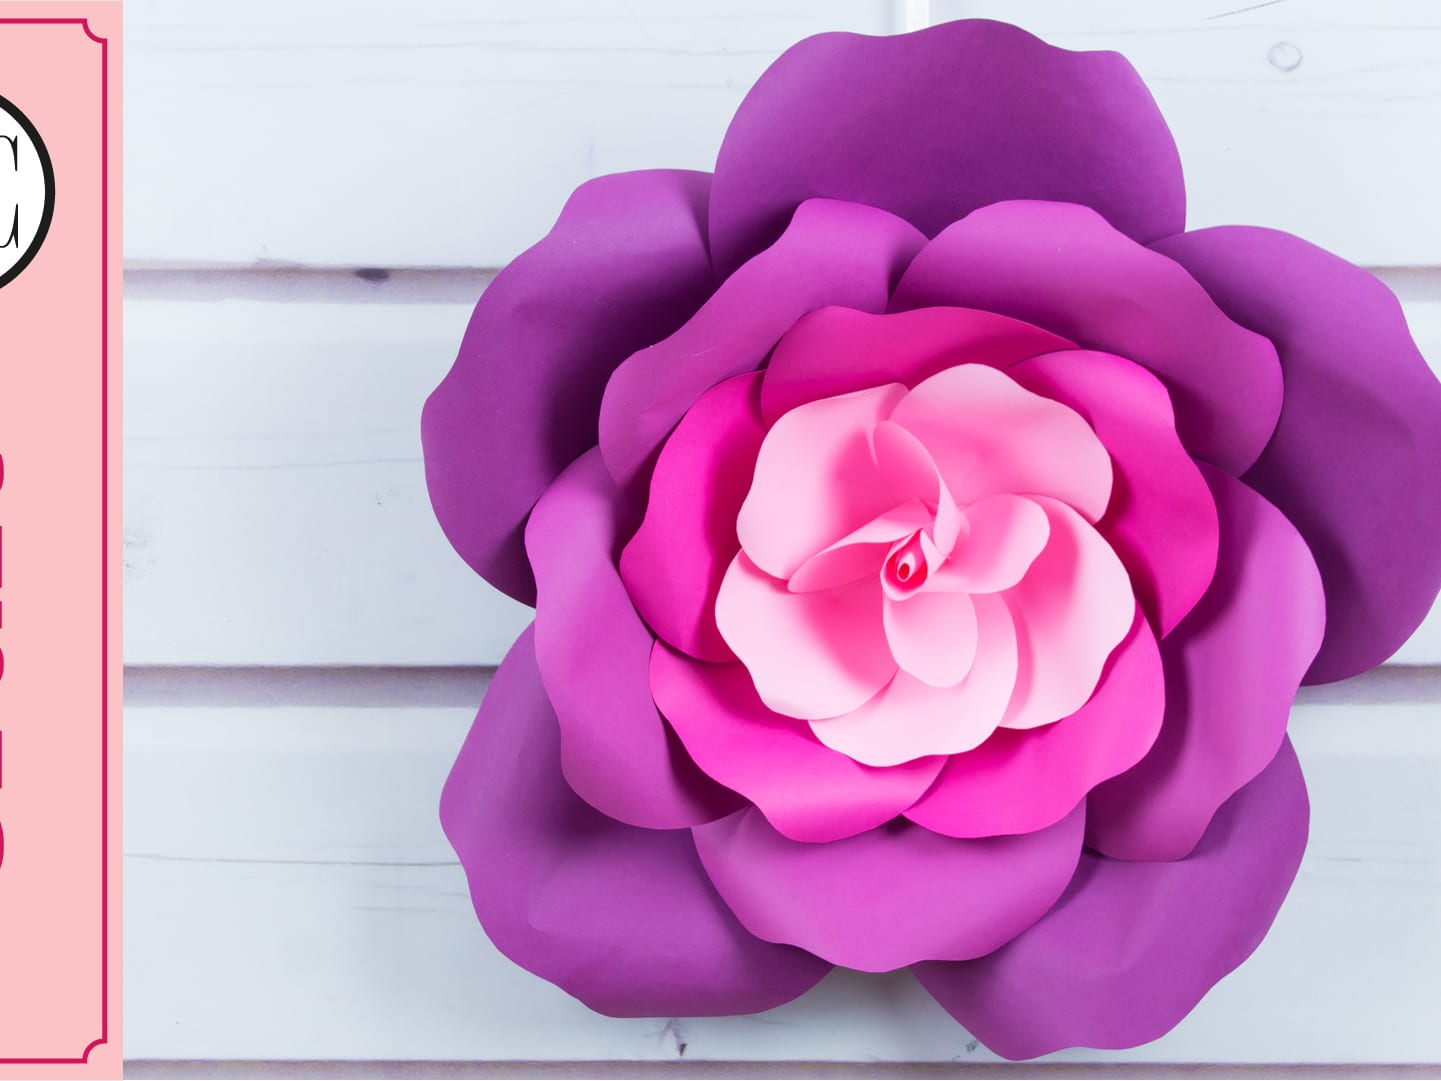 Learn To Make Giant Paper Roses In 5